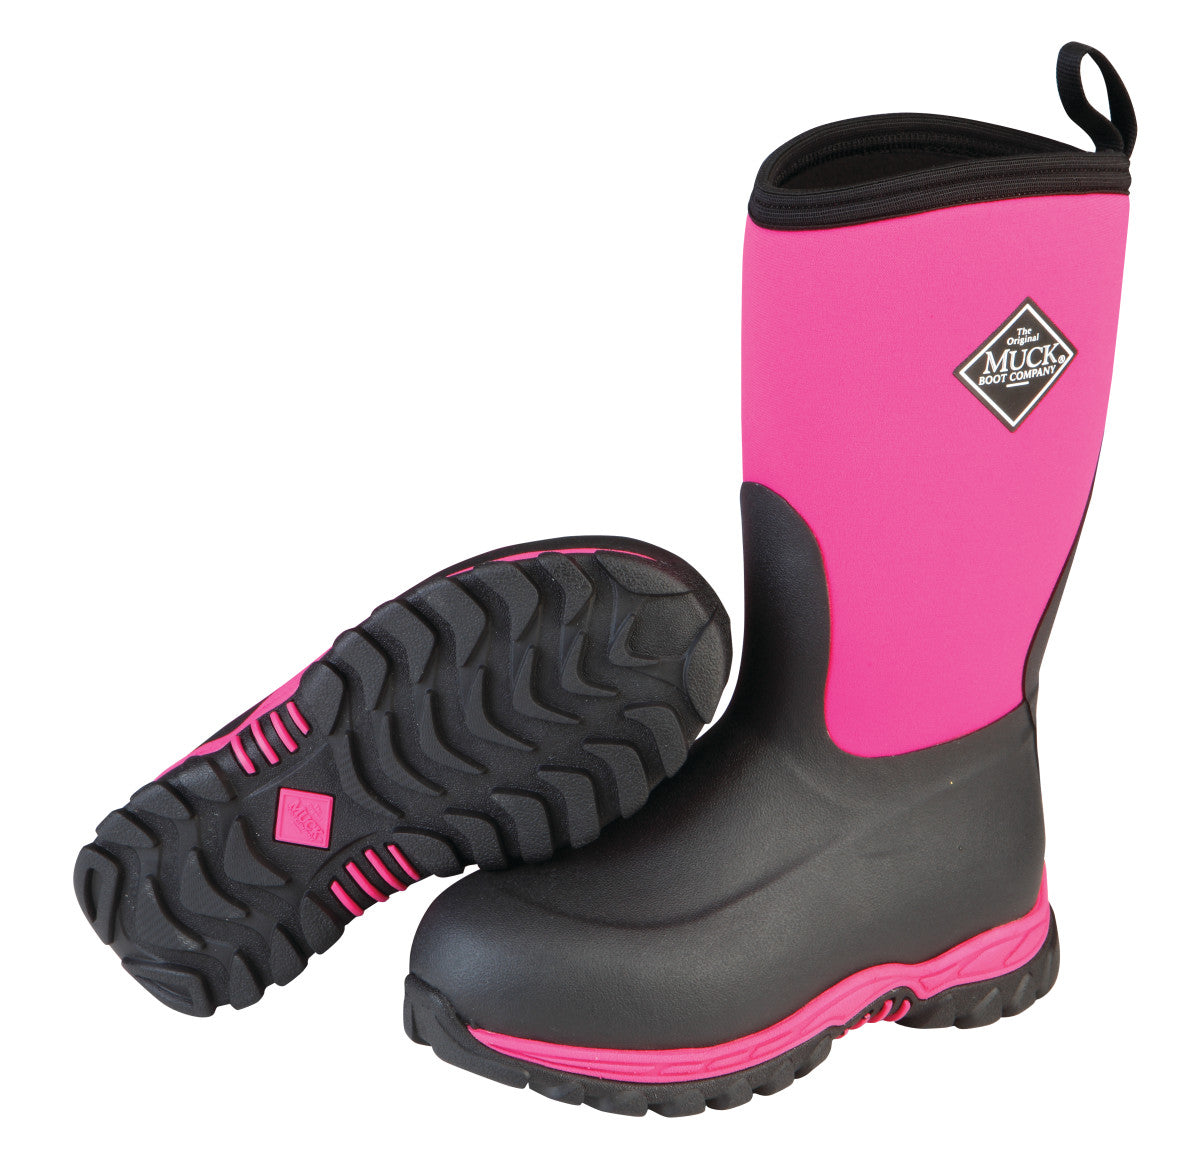 Kids' Muck Boot Rugged II Winter Boot in Pink/Black from the side